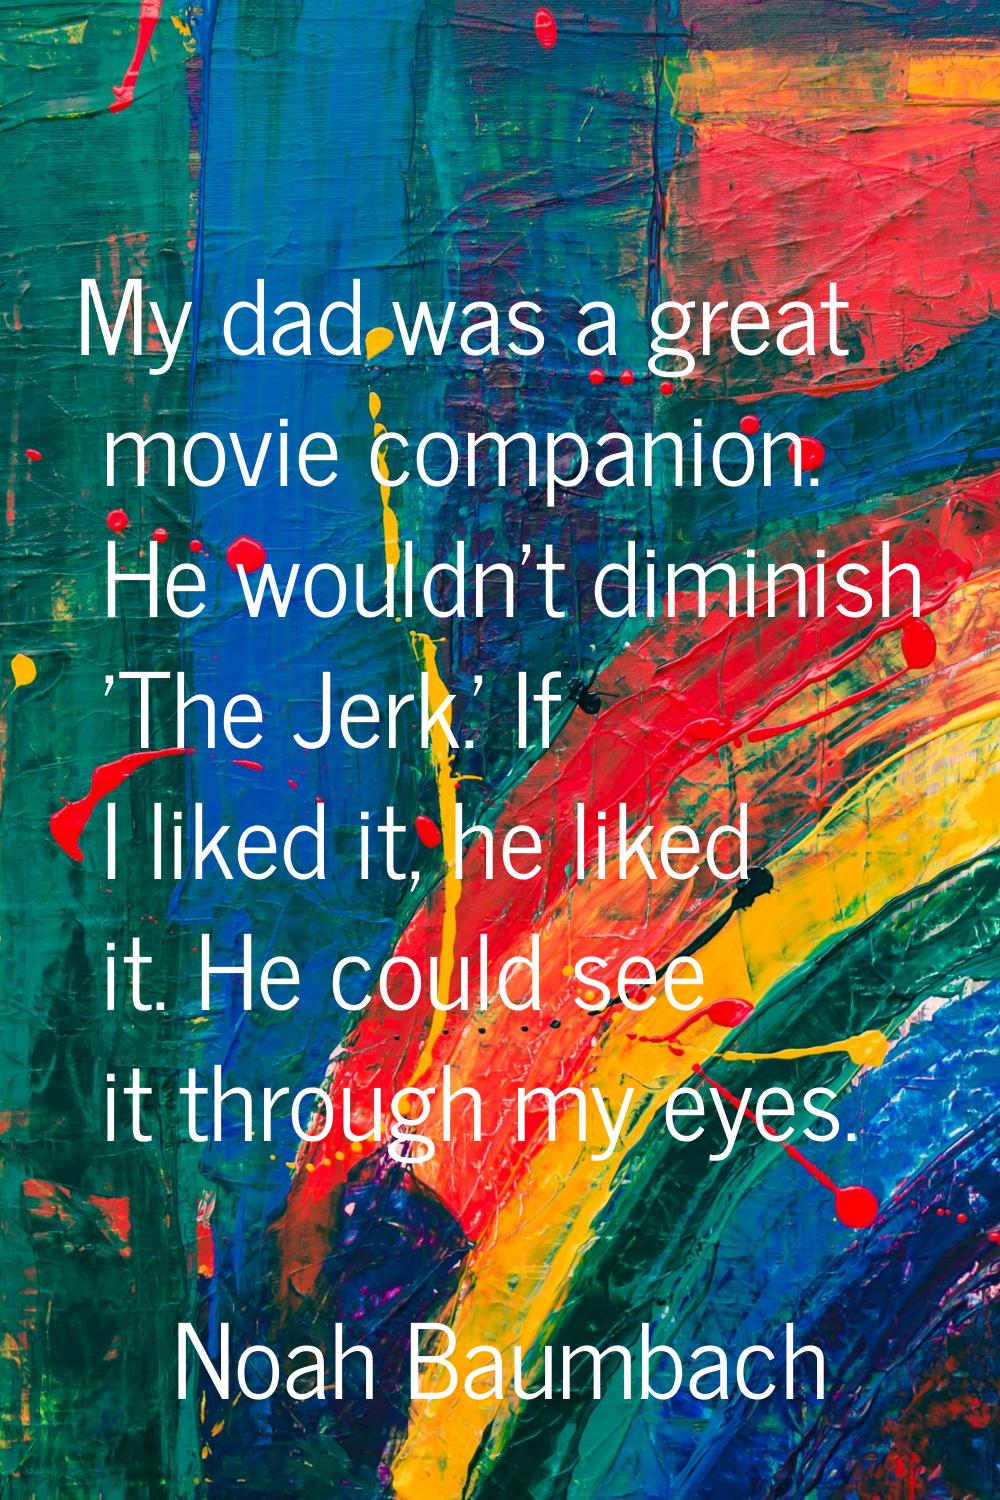 My dad was a great movie companion. He wouldn't diminish 'The Jerk.' If I liked it, he liked it. He